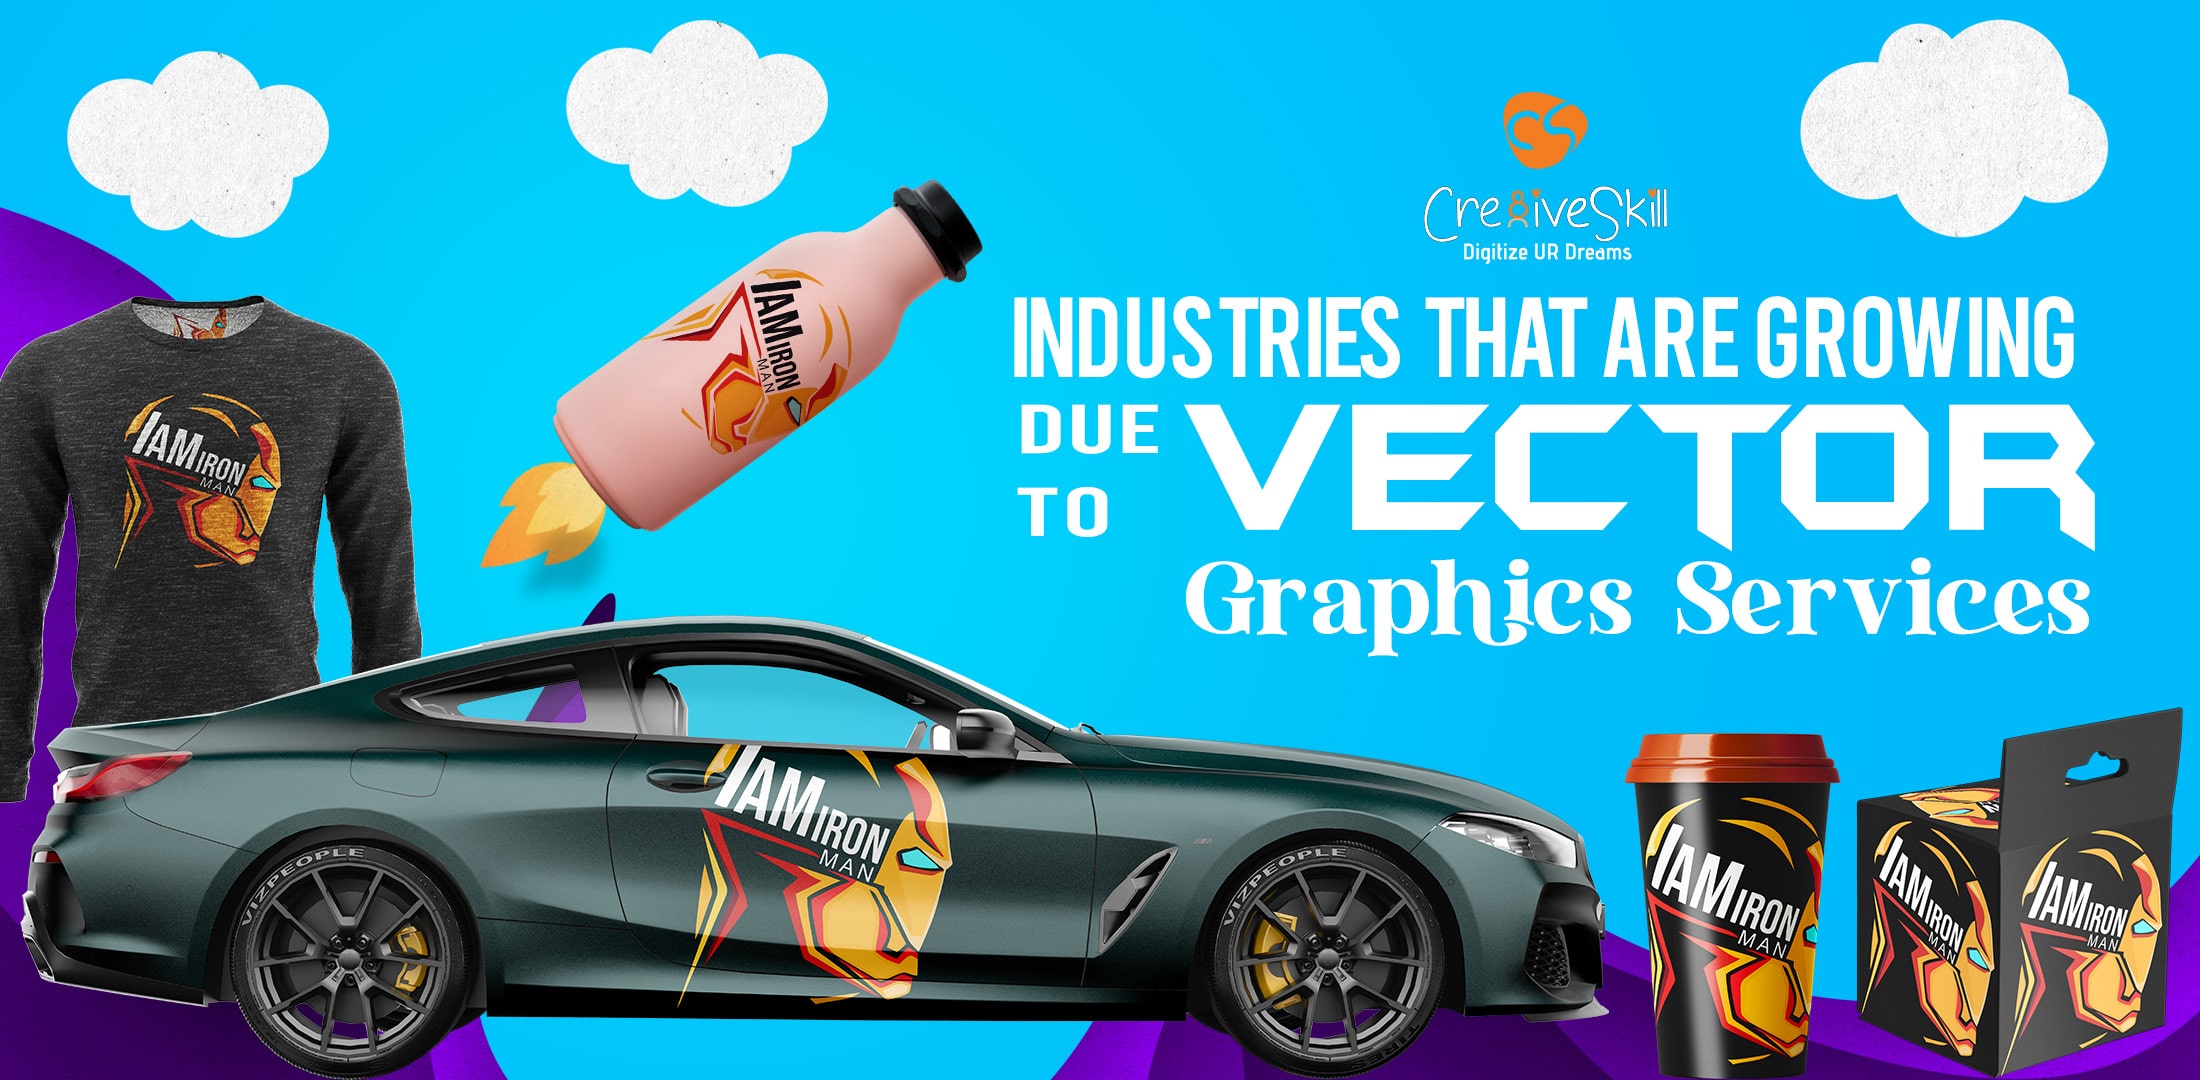 Top Growing Industries Due To Use Of Vector Graphic Services